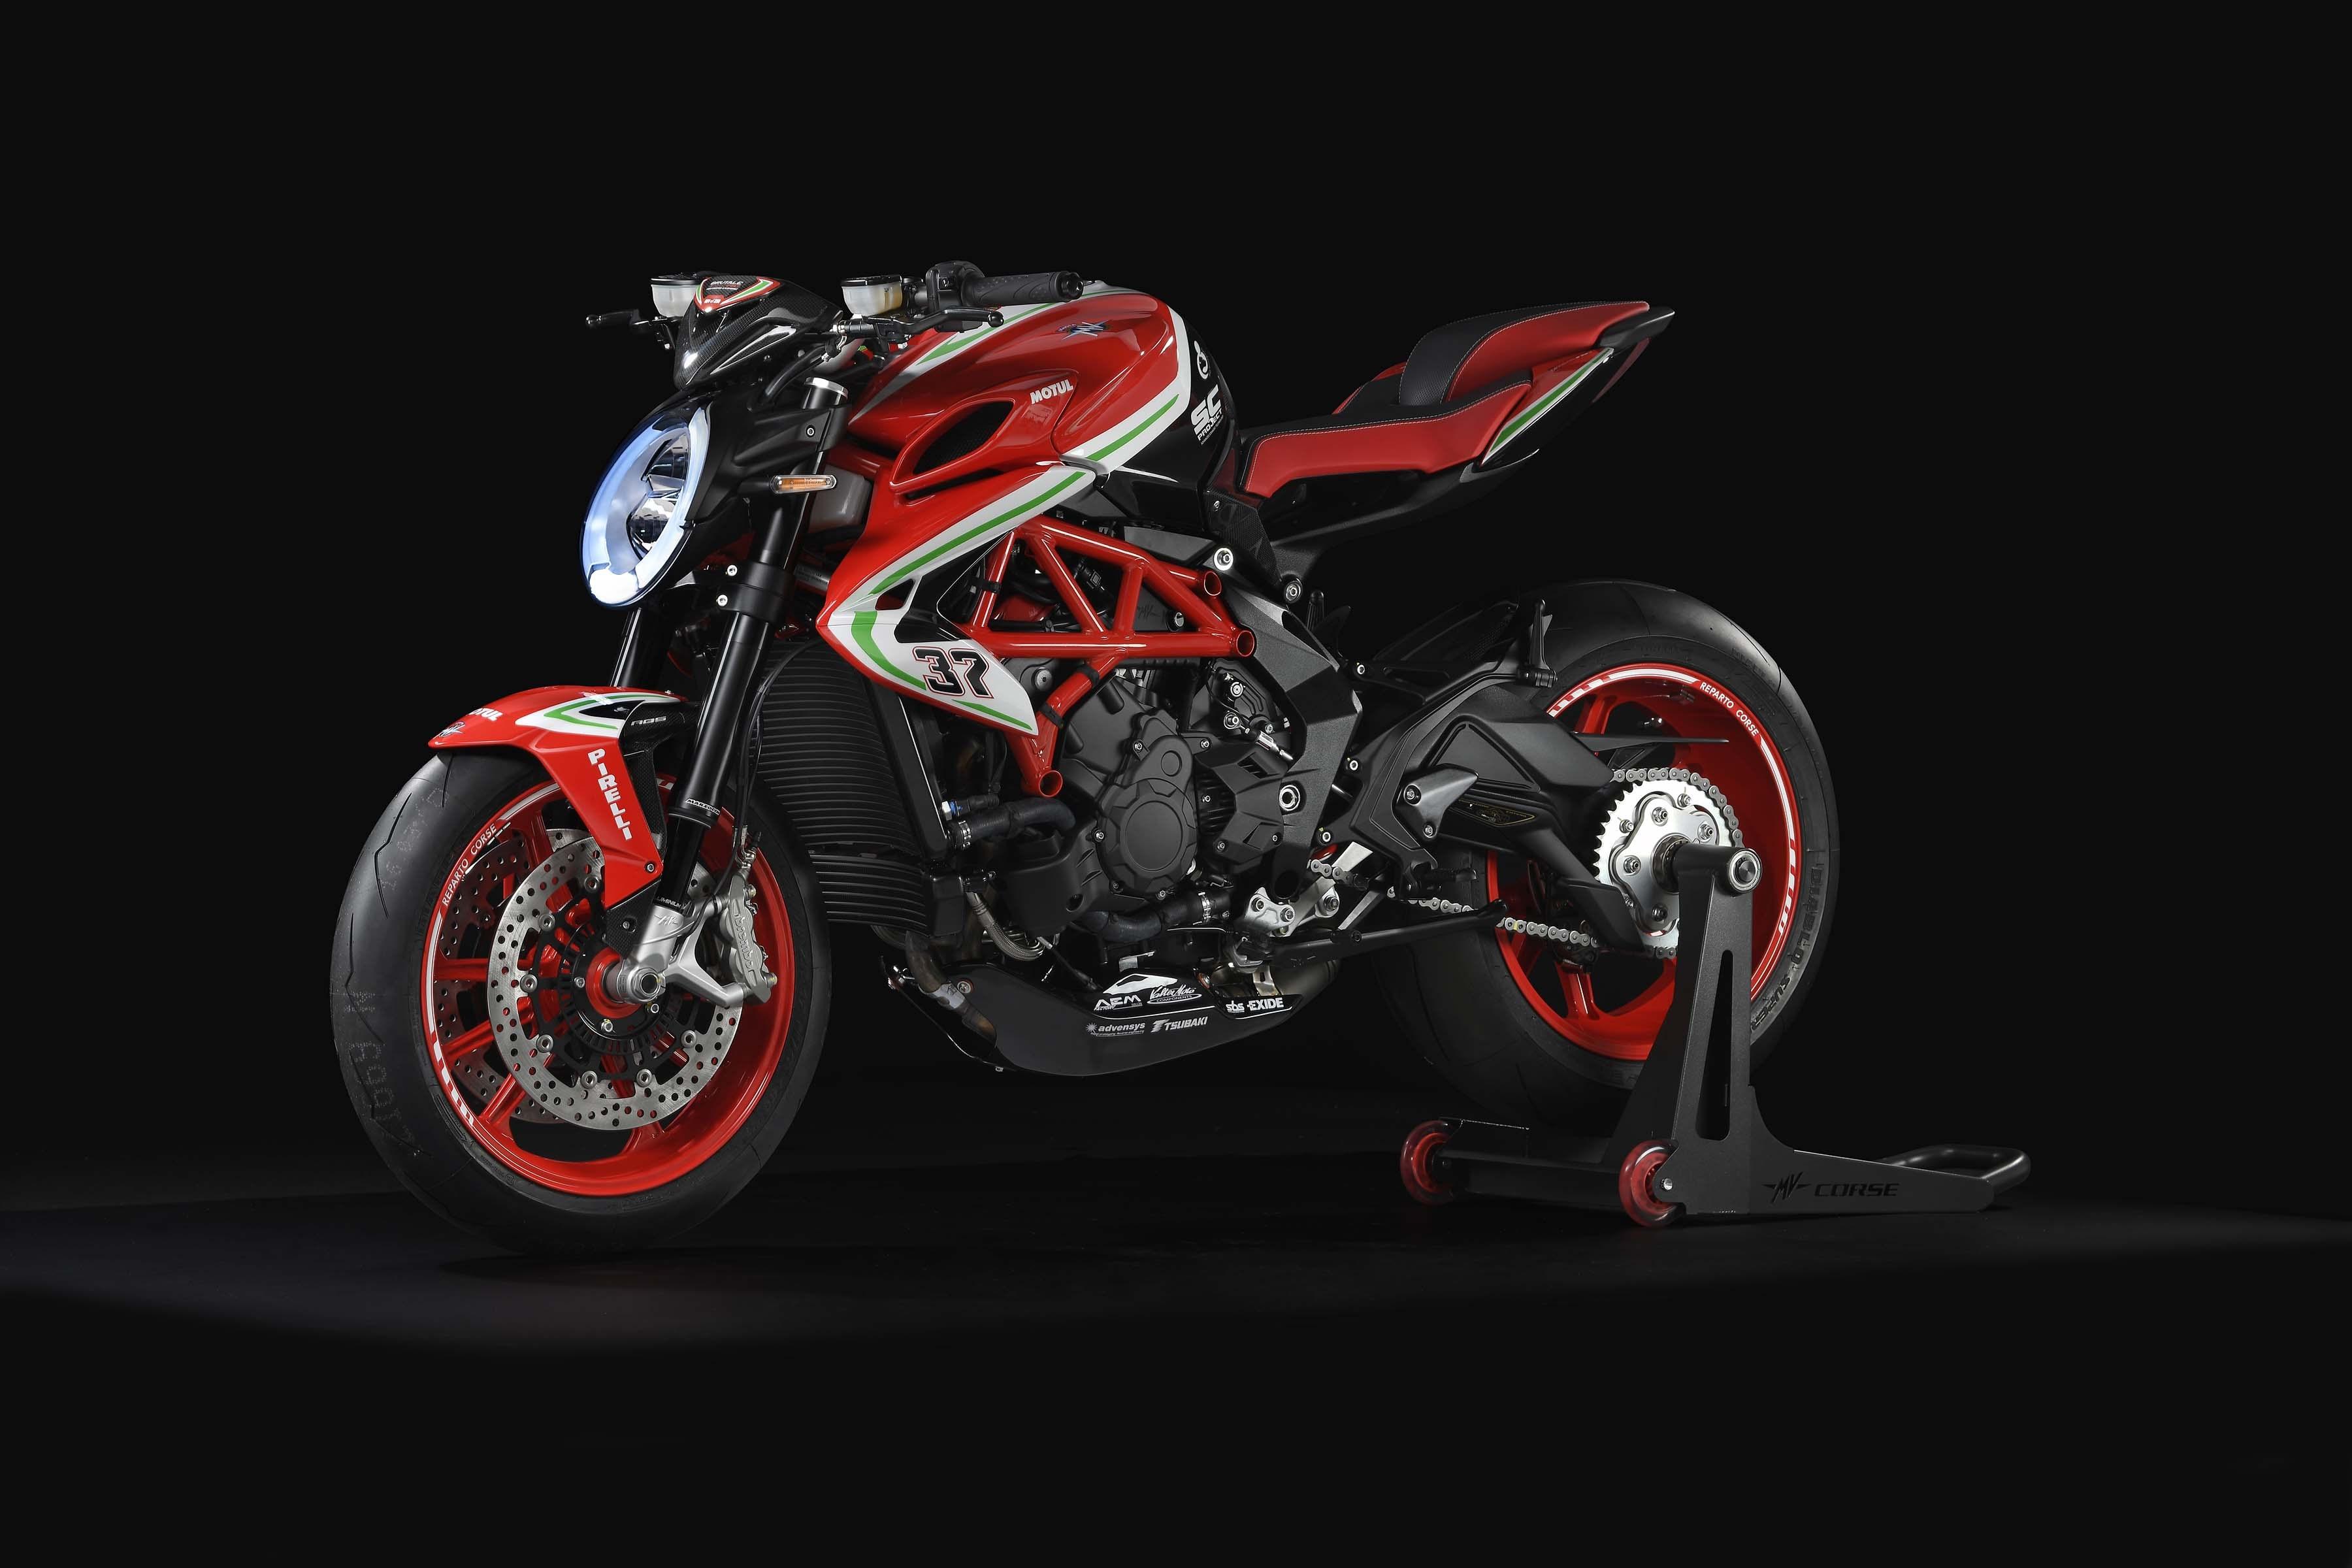 Wallpaper MV Agusta Brutale 800 RC, 4K, Automotive,. Wallpaper for iPhone, Android, Mobile and Desktop